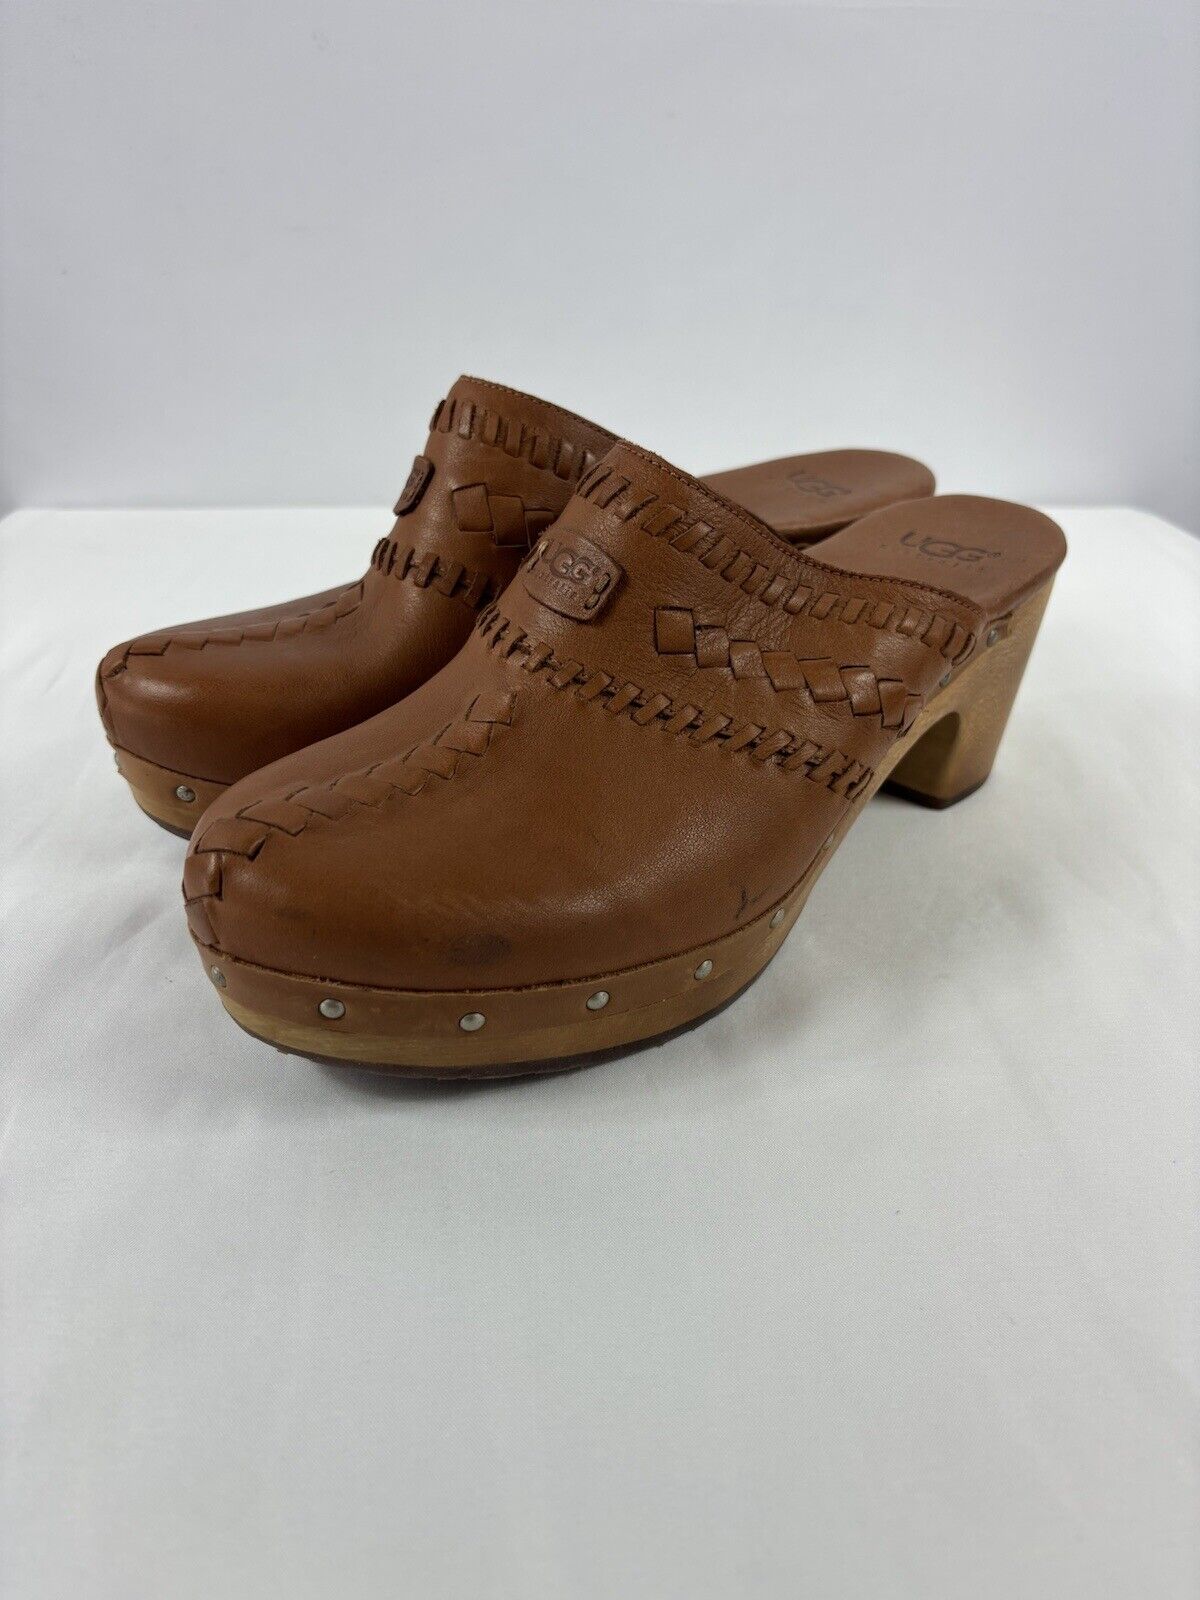 Ugg Vivica Clogs Brown Leather 9 Whipstitched Woo… - image 2